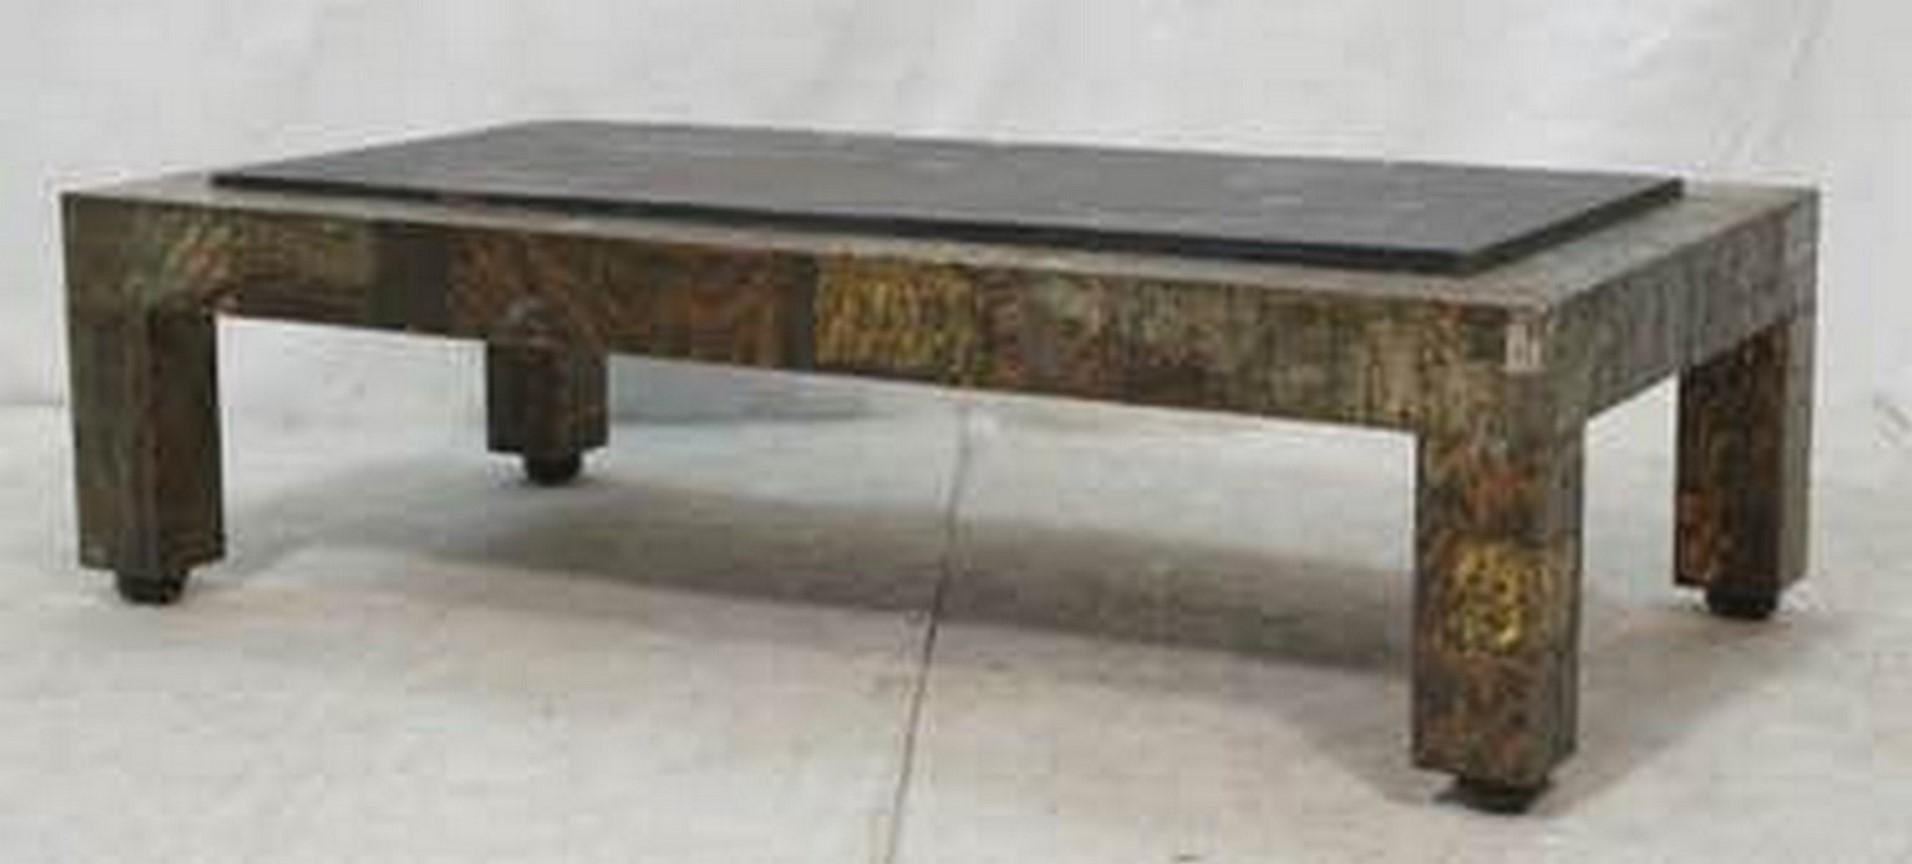 Paul Evans patchwork copper and bronze coffee table with aged riven slate top.
Item location New York.